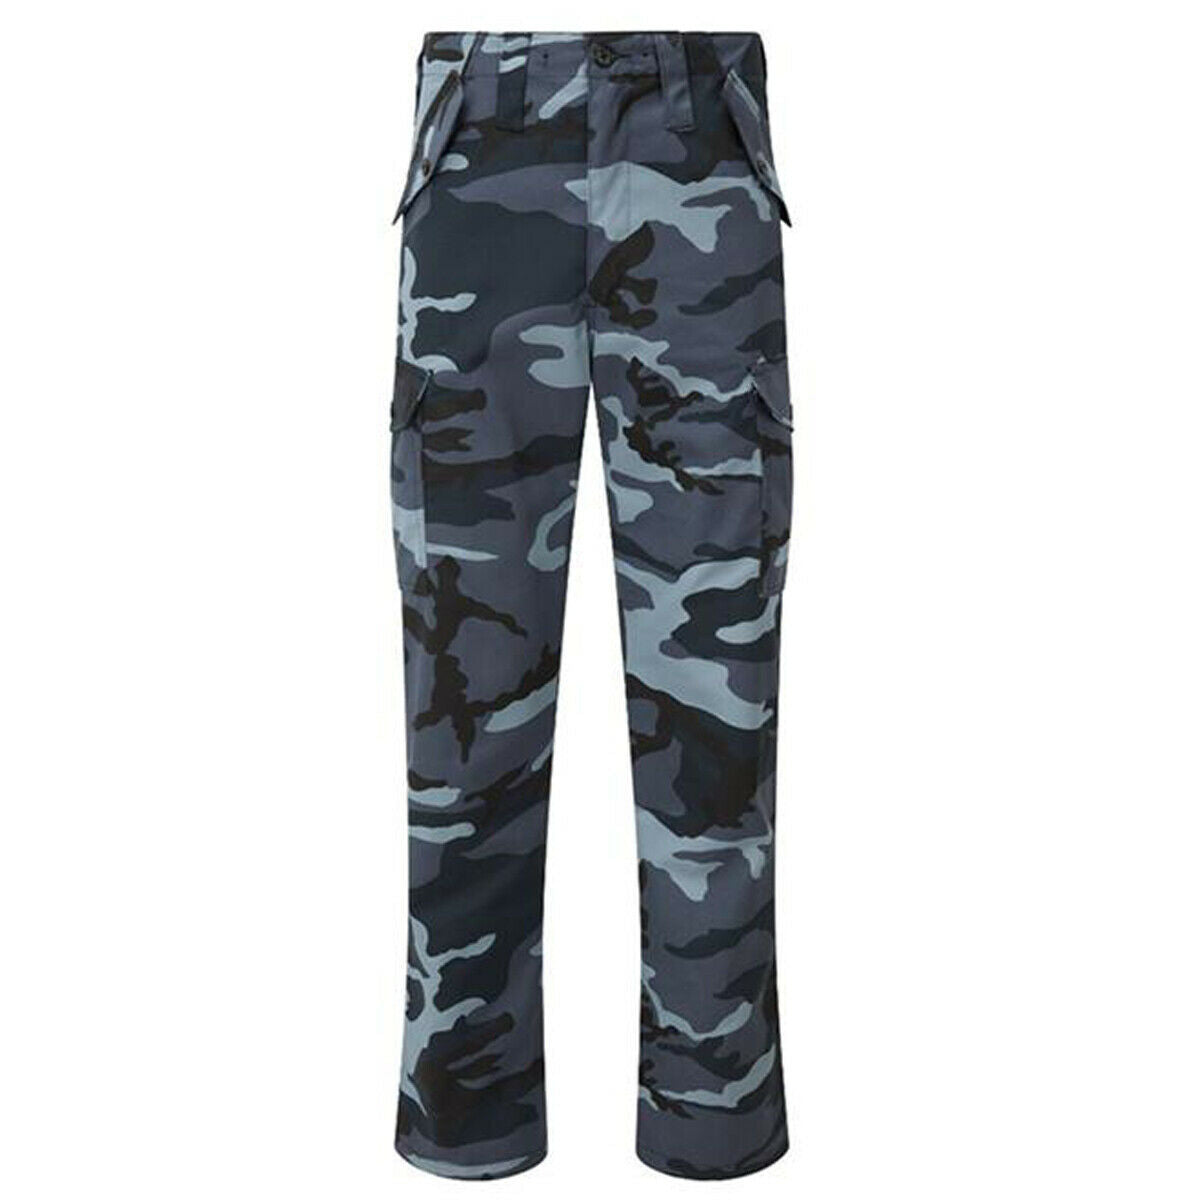 Men's Fort Cargo Multipocket Camo Work Trousers with Removable Drawstring